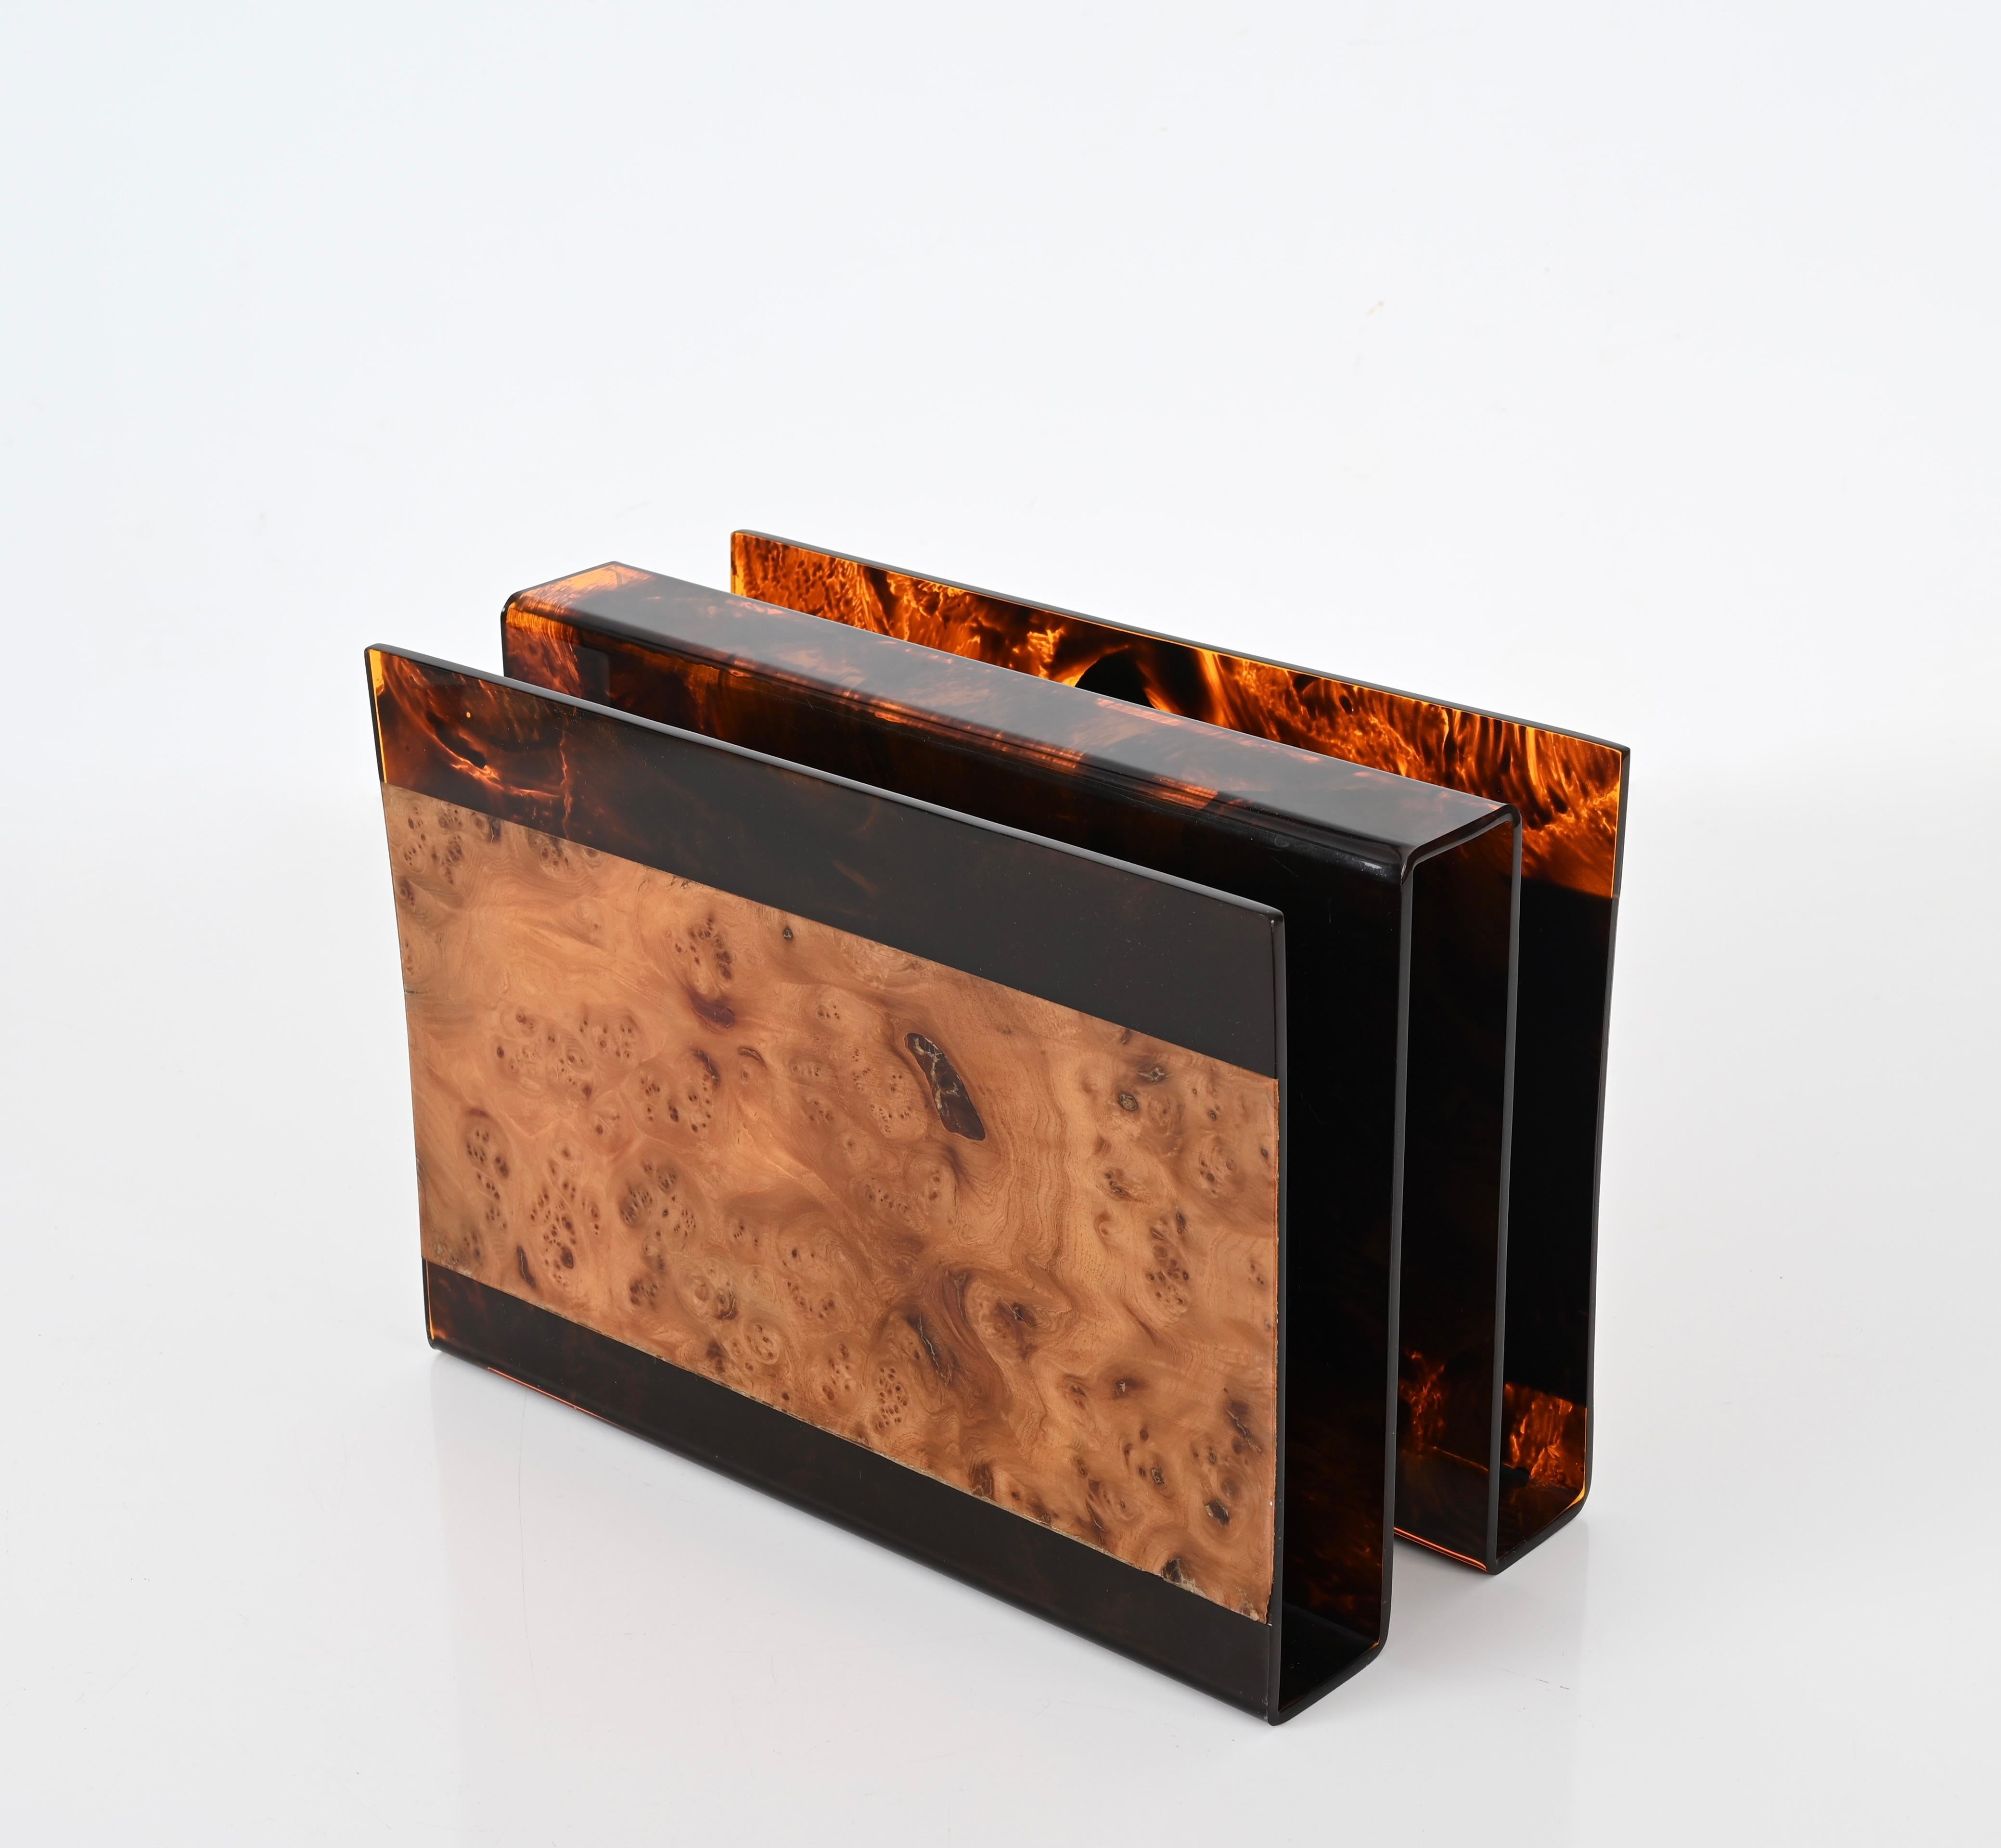 Guzzini Magazine Rack in Tortoiseshell Lucite and Briar, Italy 1970s For Sale 10